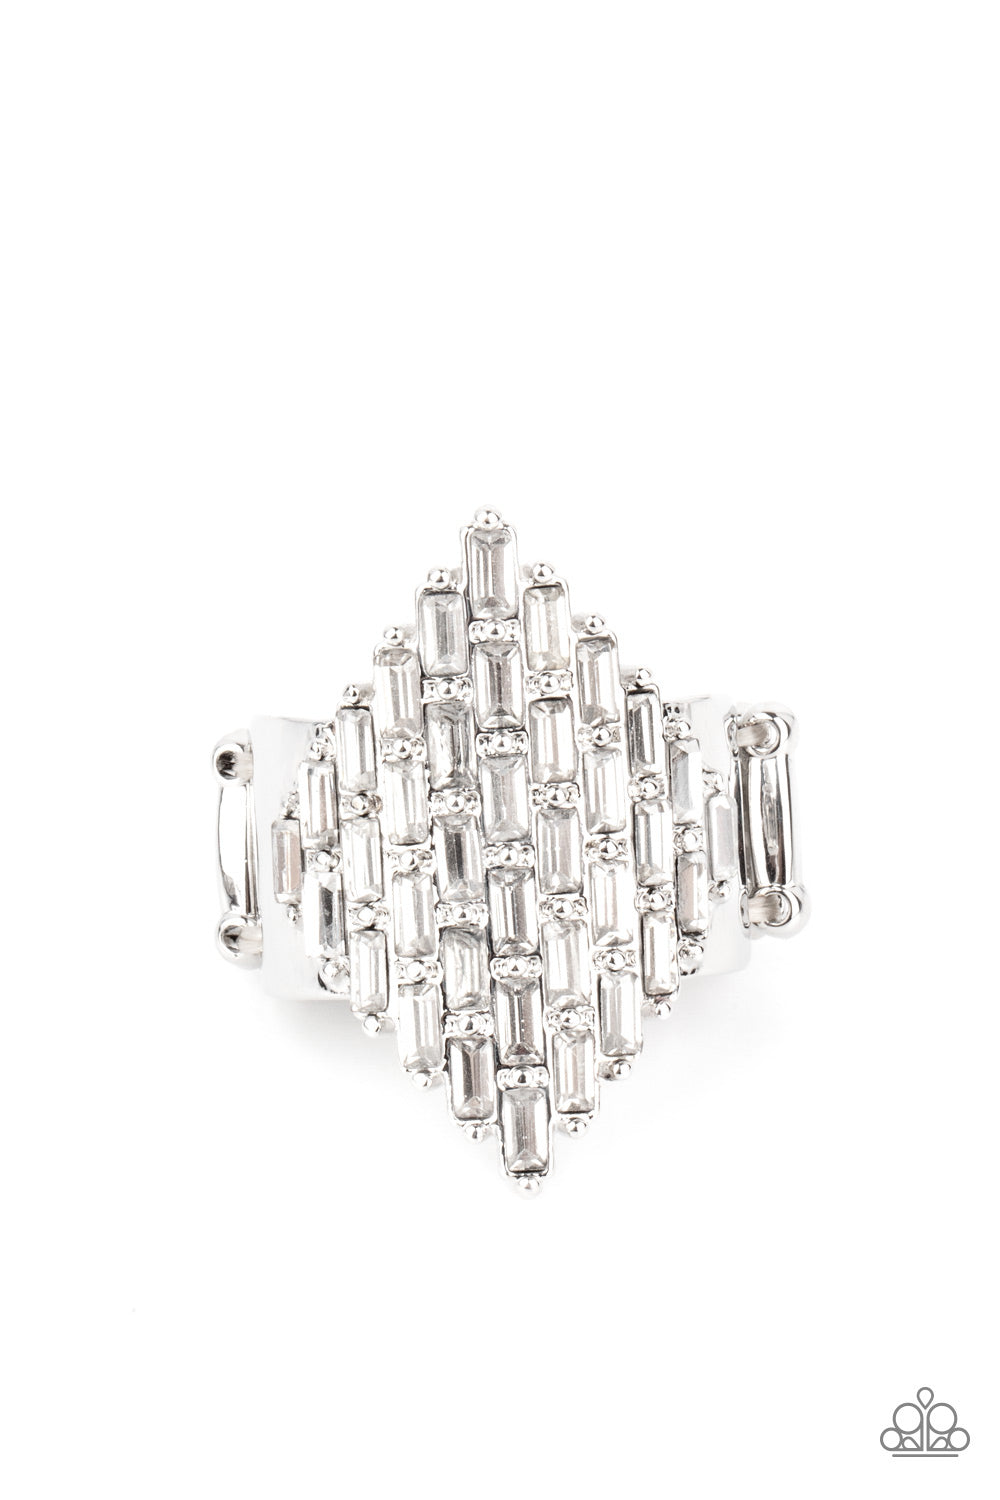 Life of the Party ring. White rhinestones layered across a beautiful silver fram.